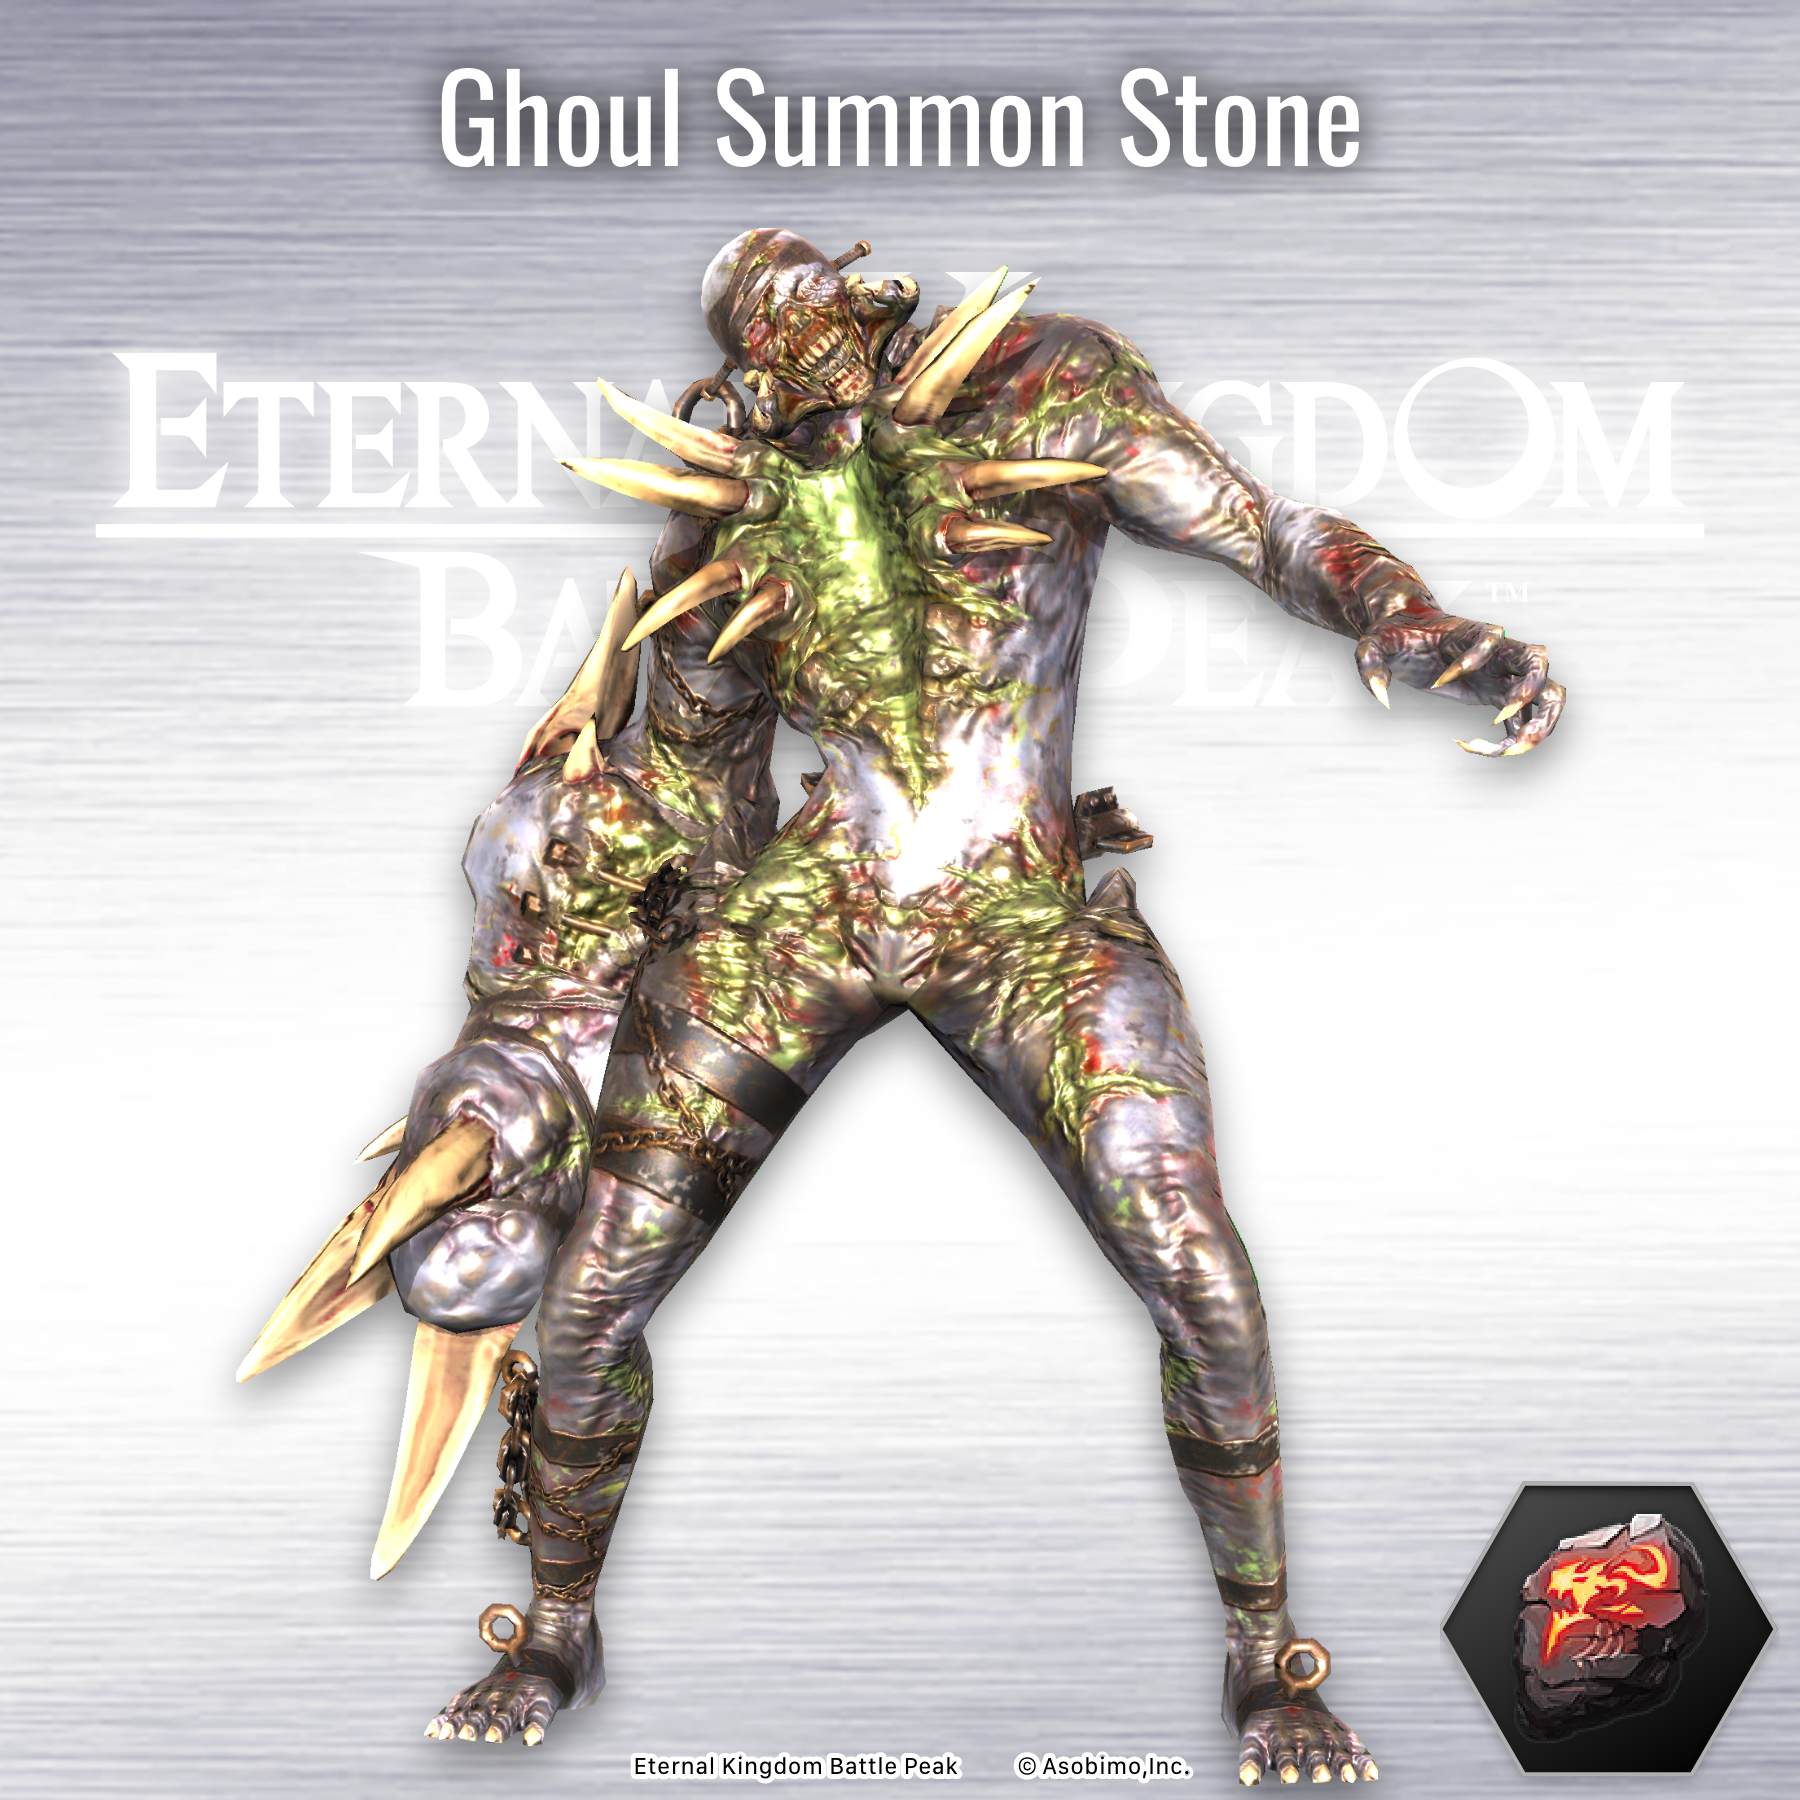 Ghoul Summon Stone